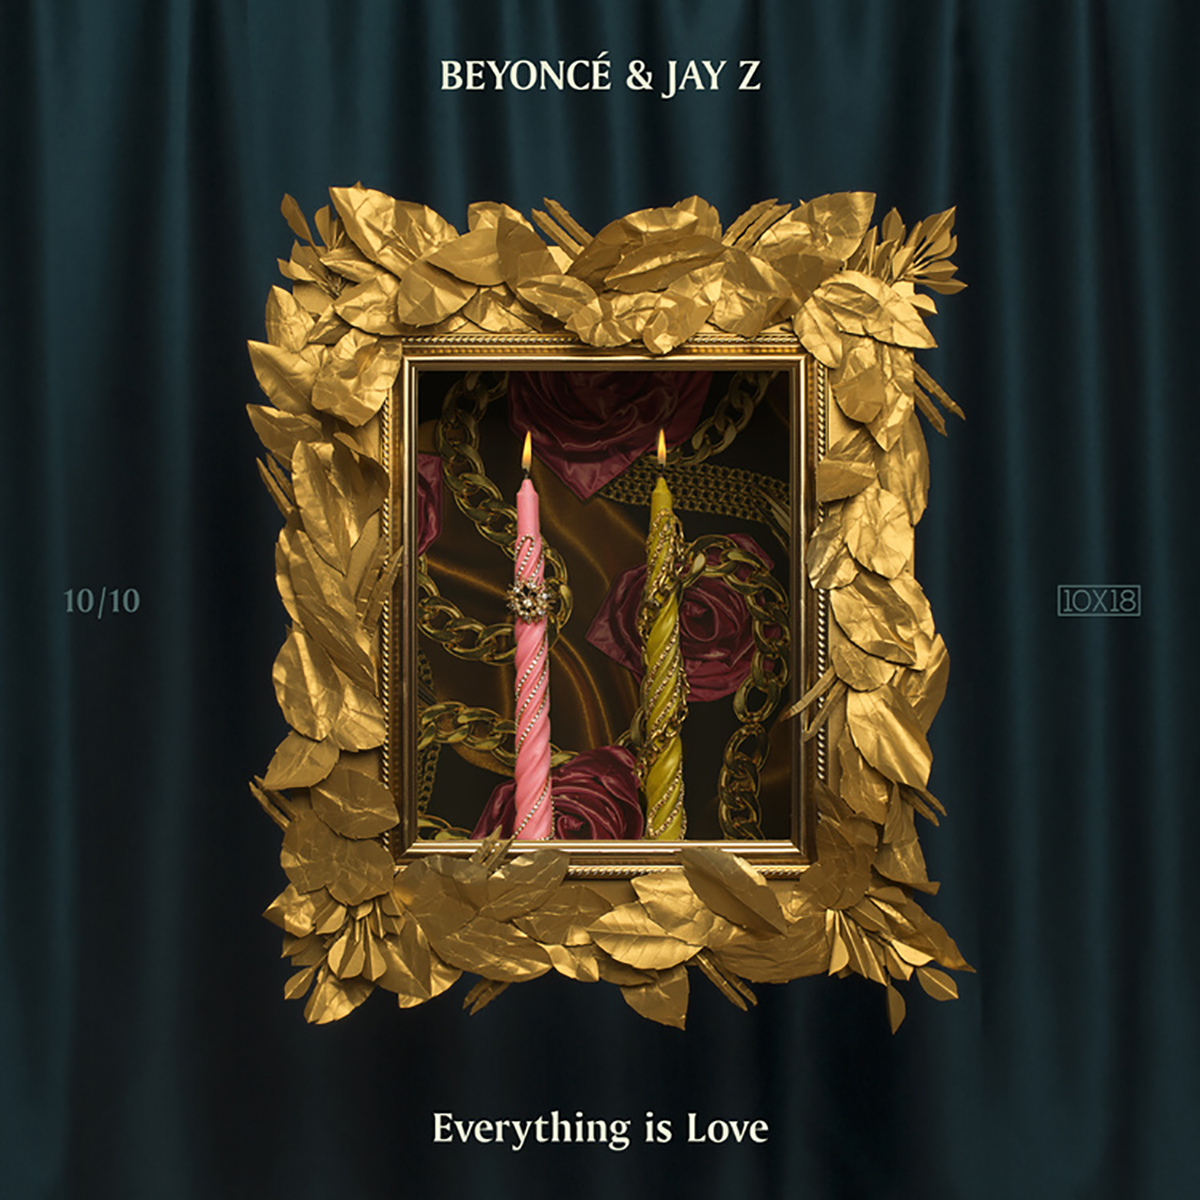 Beyonce and Jay Z album cover